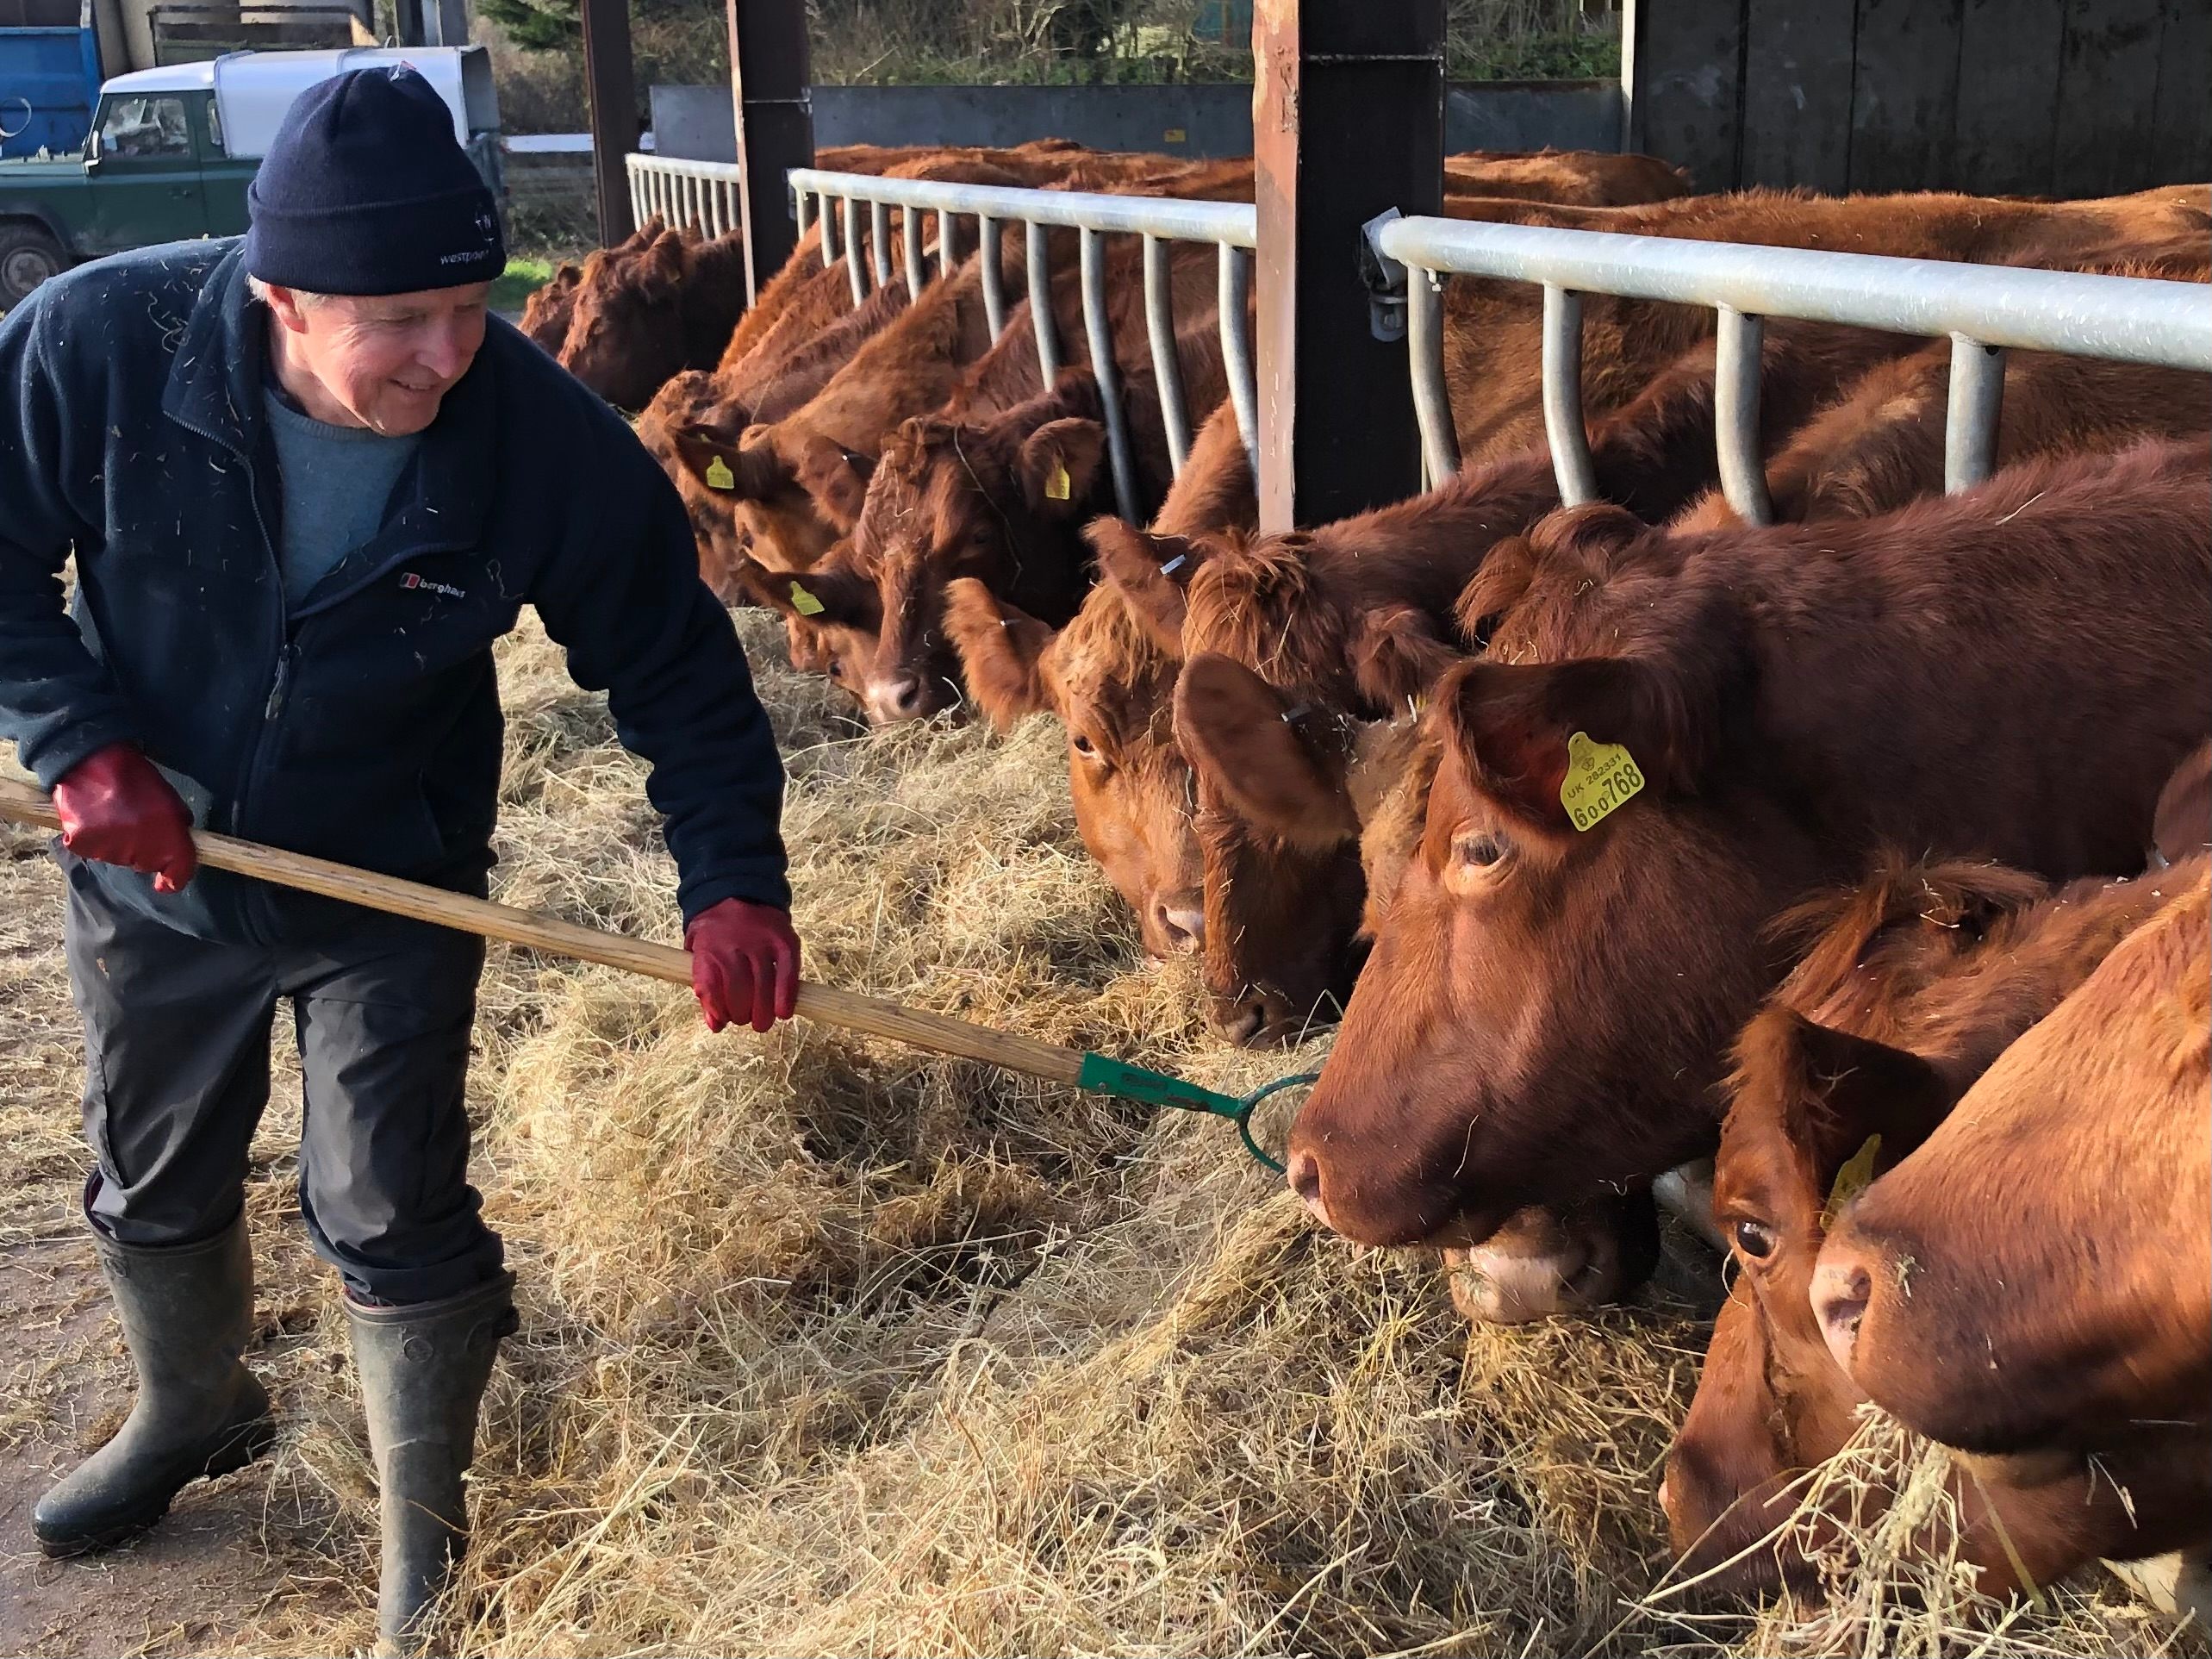 Feeding cows during the winter.